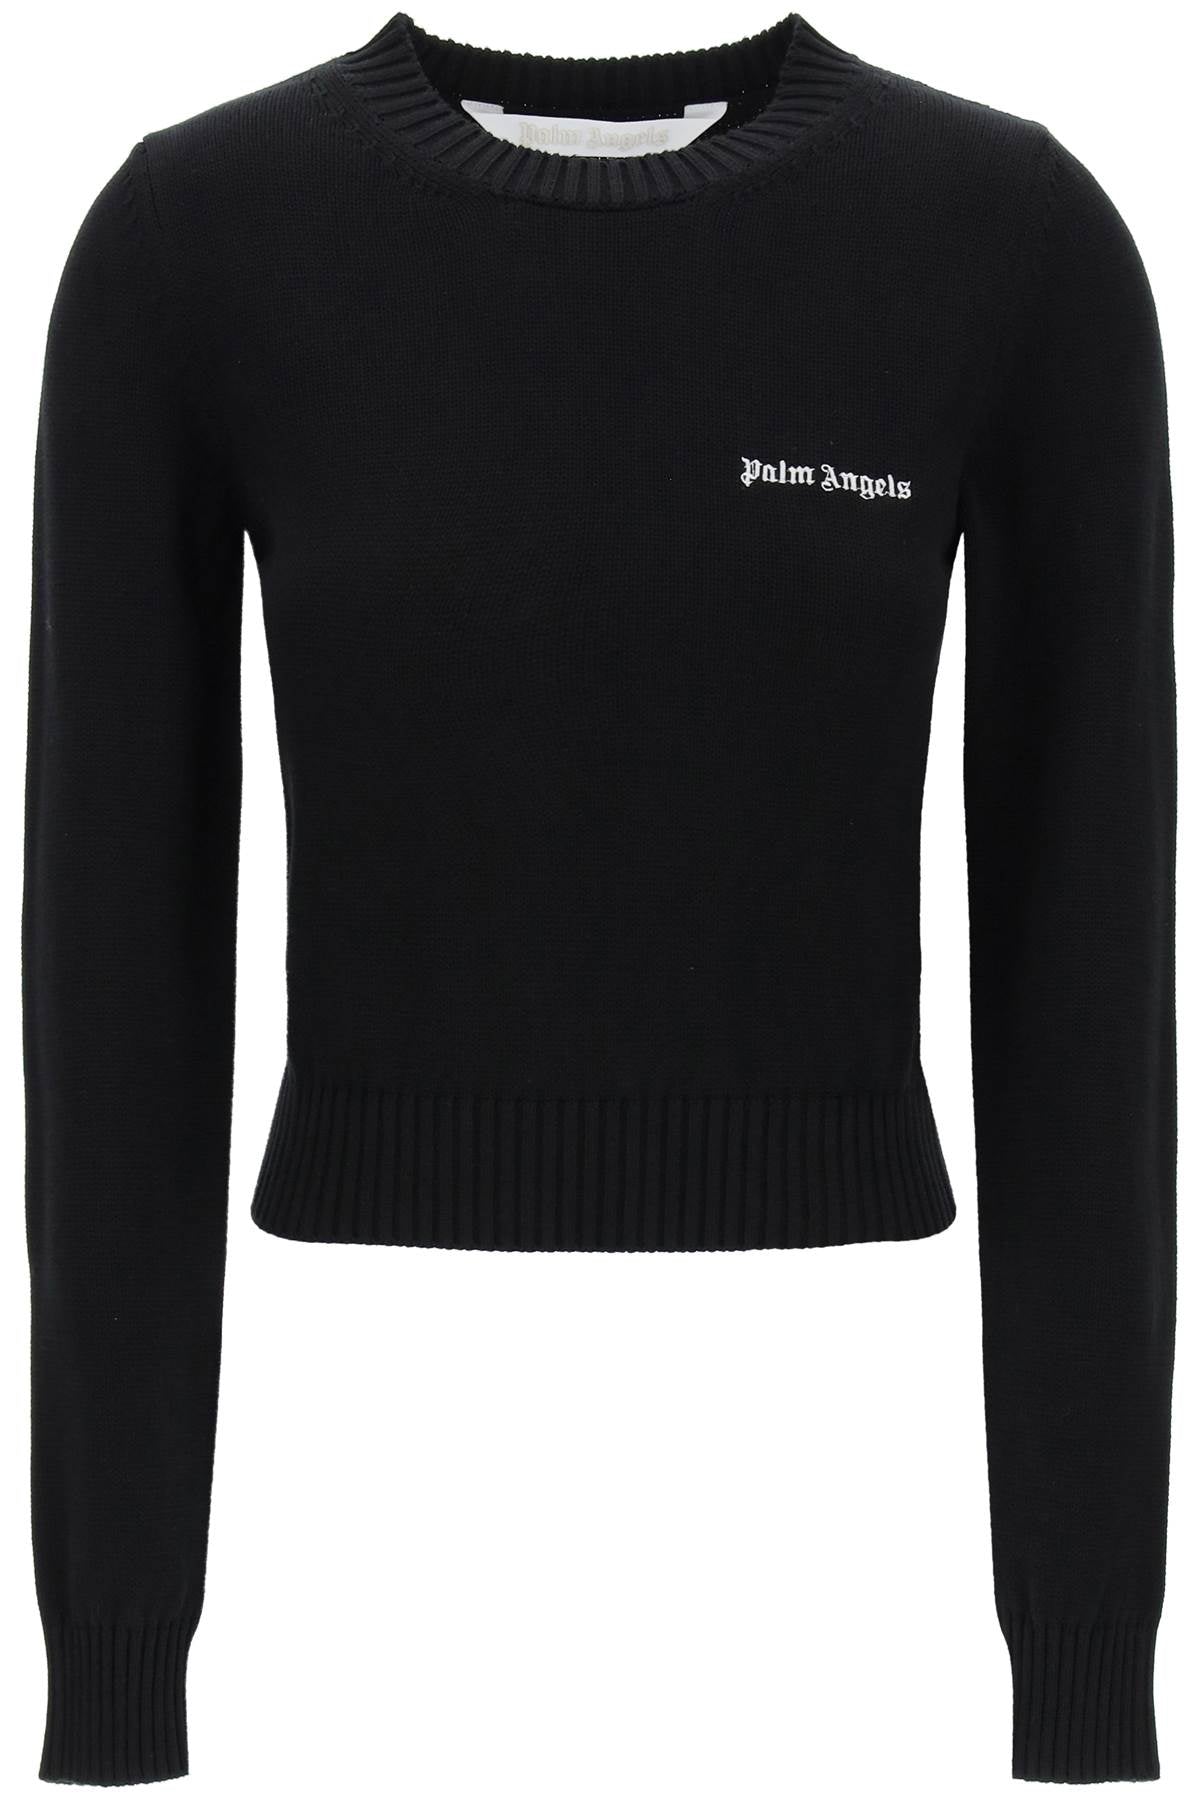 Palm angels pullover cropped con ricamo logo-0